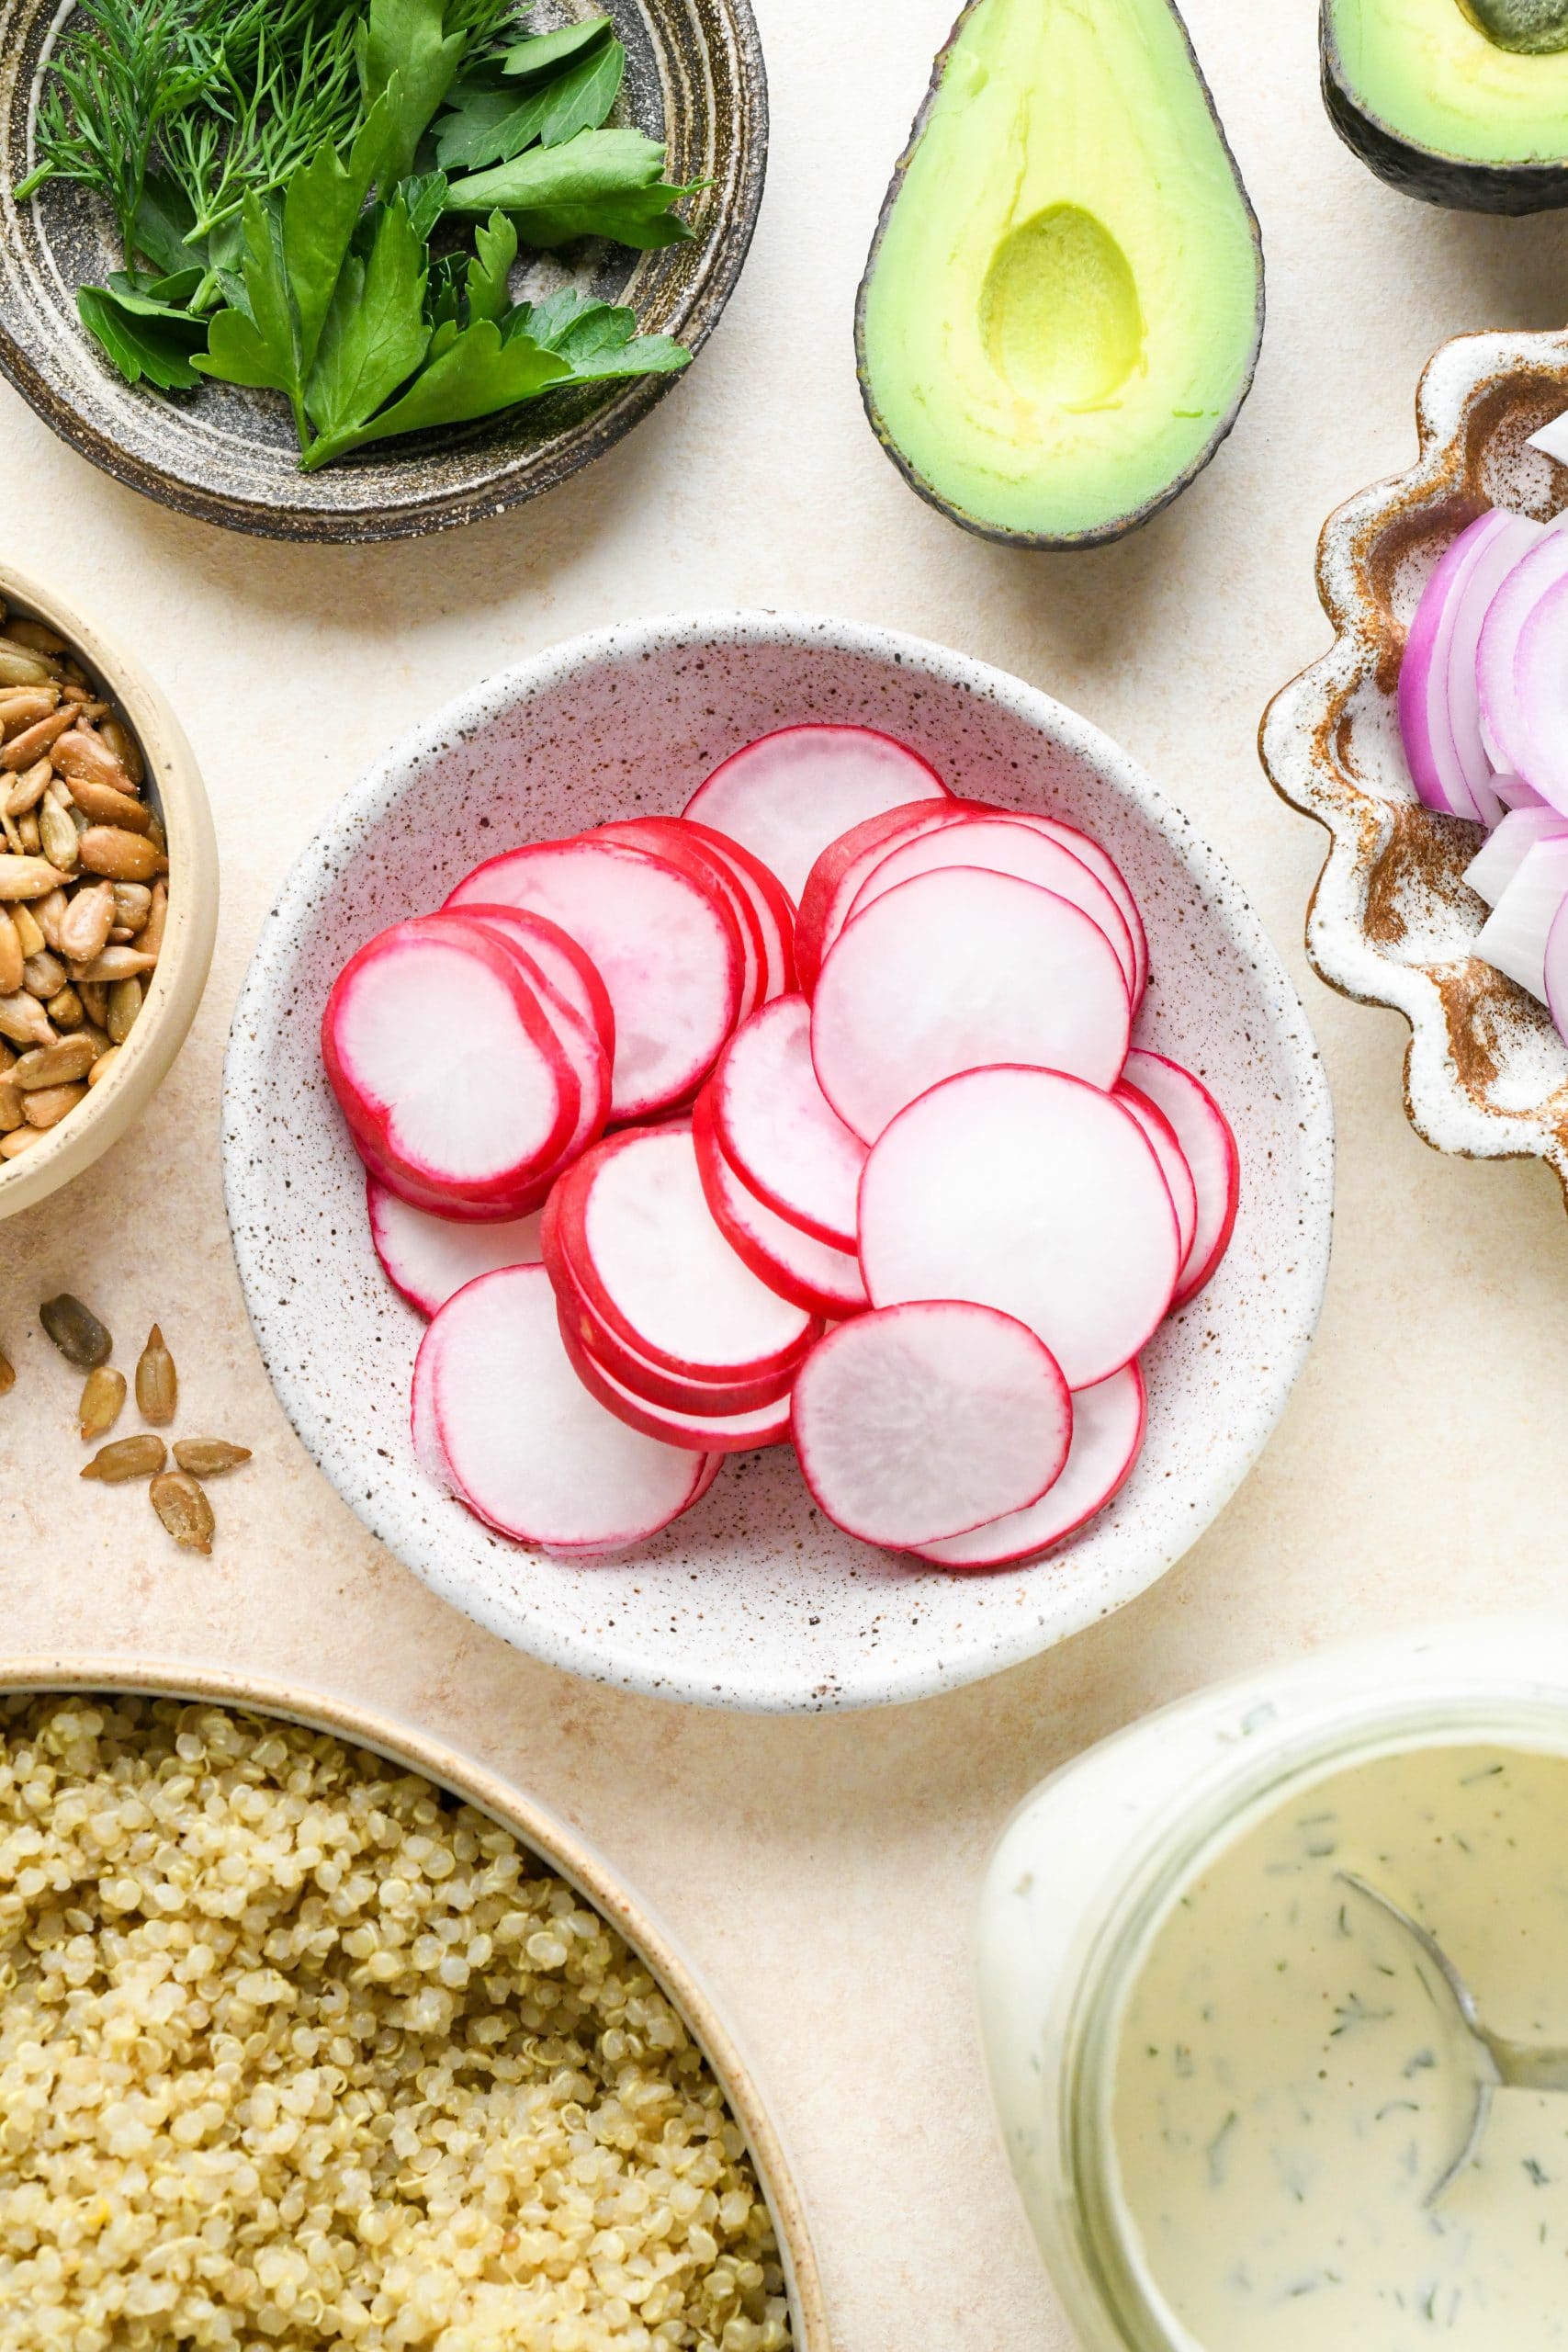 Ingredients for buffalo roasted cauliflower bowls - radishes in a small dish, sliced avocado, sunflower seeds, quinoa, and red onion in various ceramics.